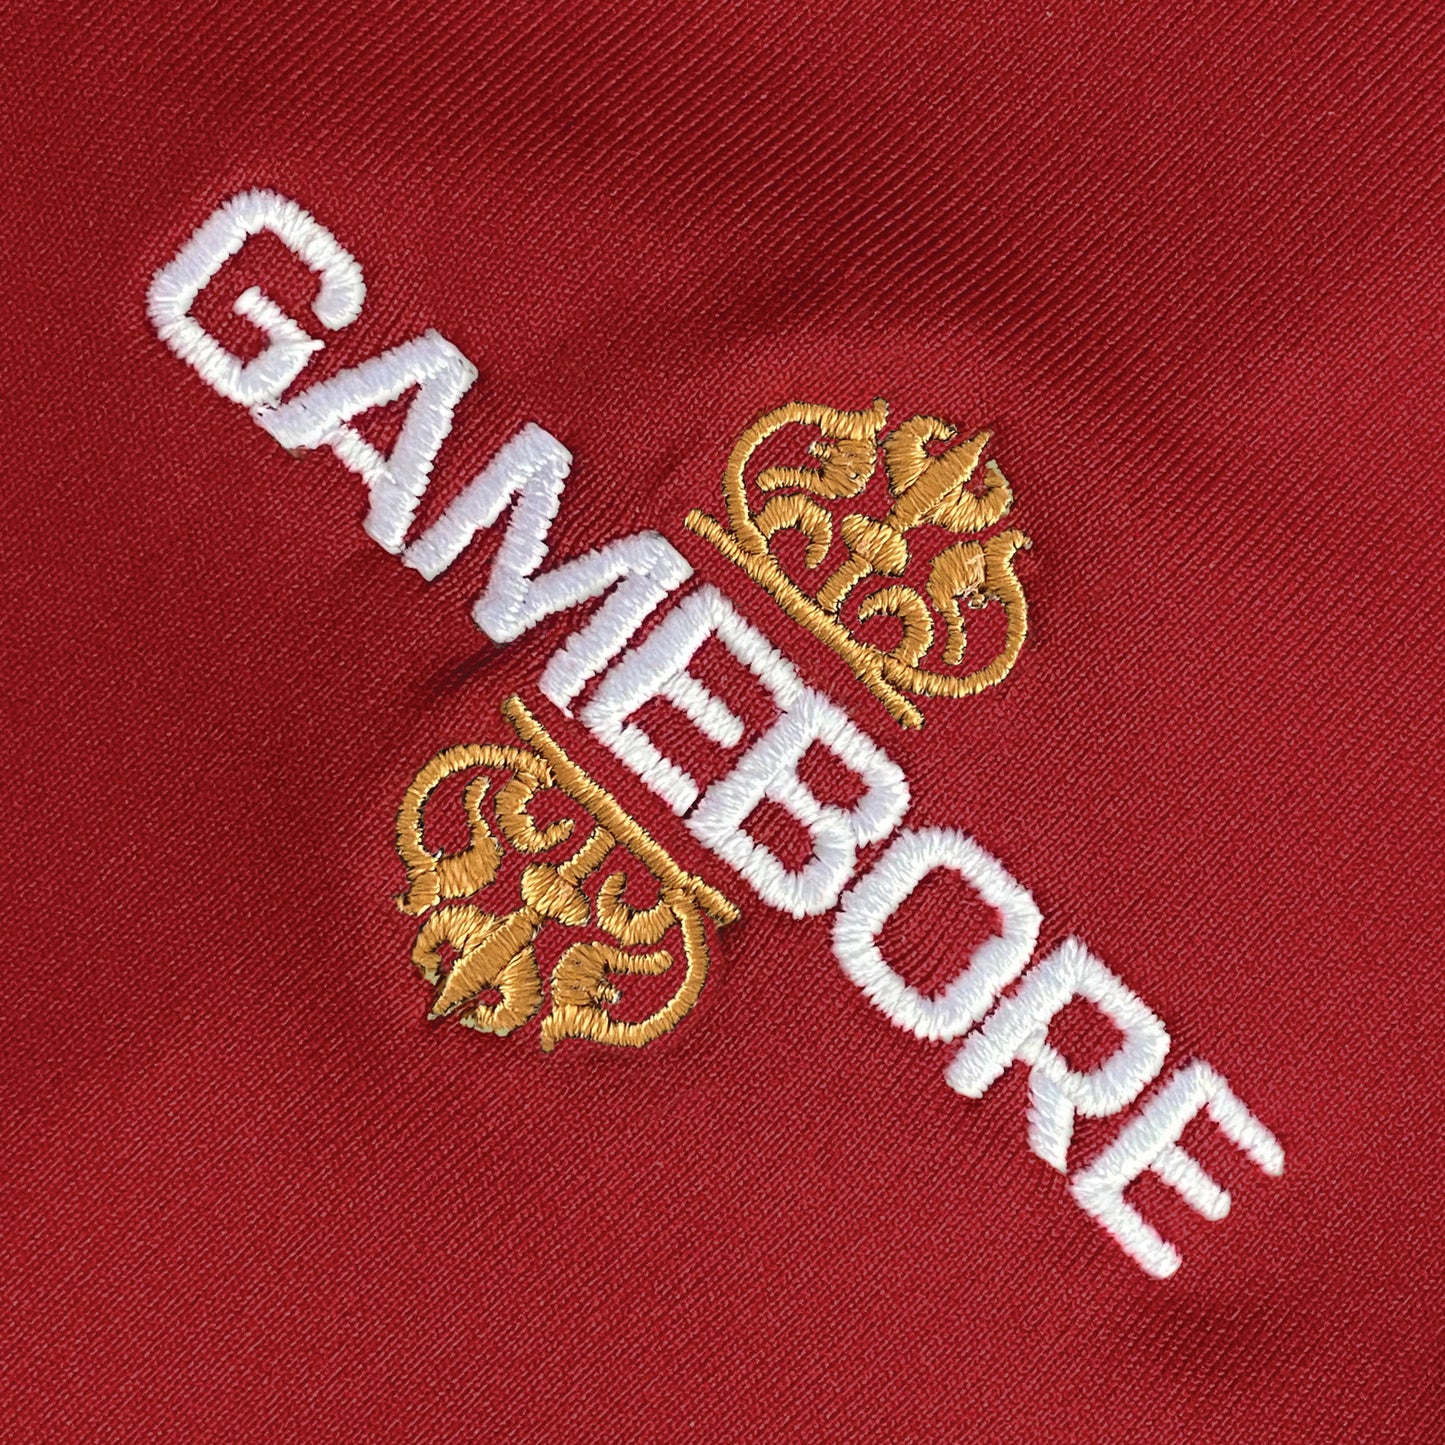 Gamebore Polo Shirt (Red)